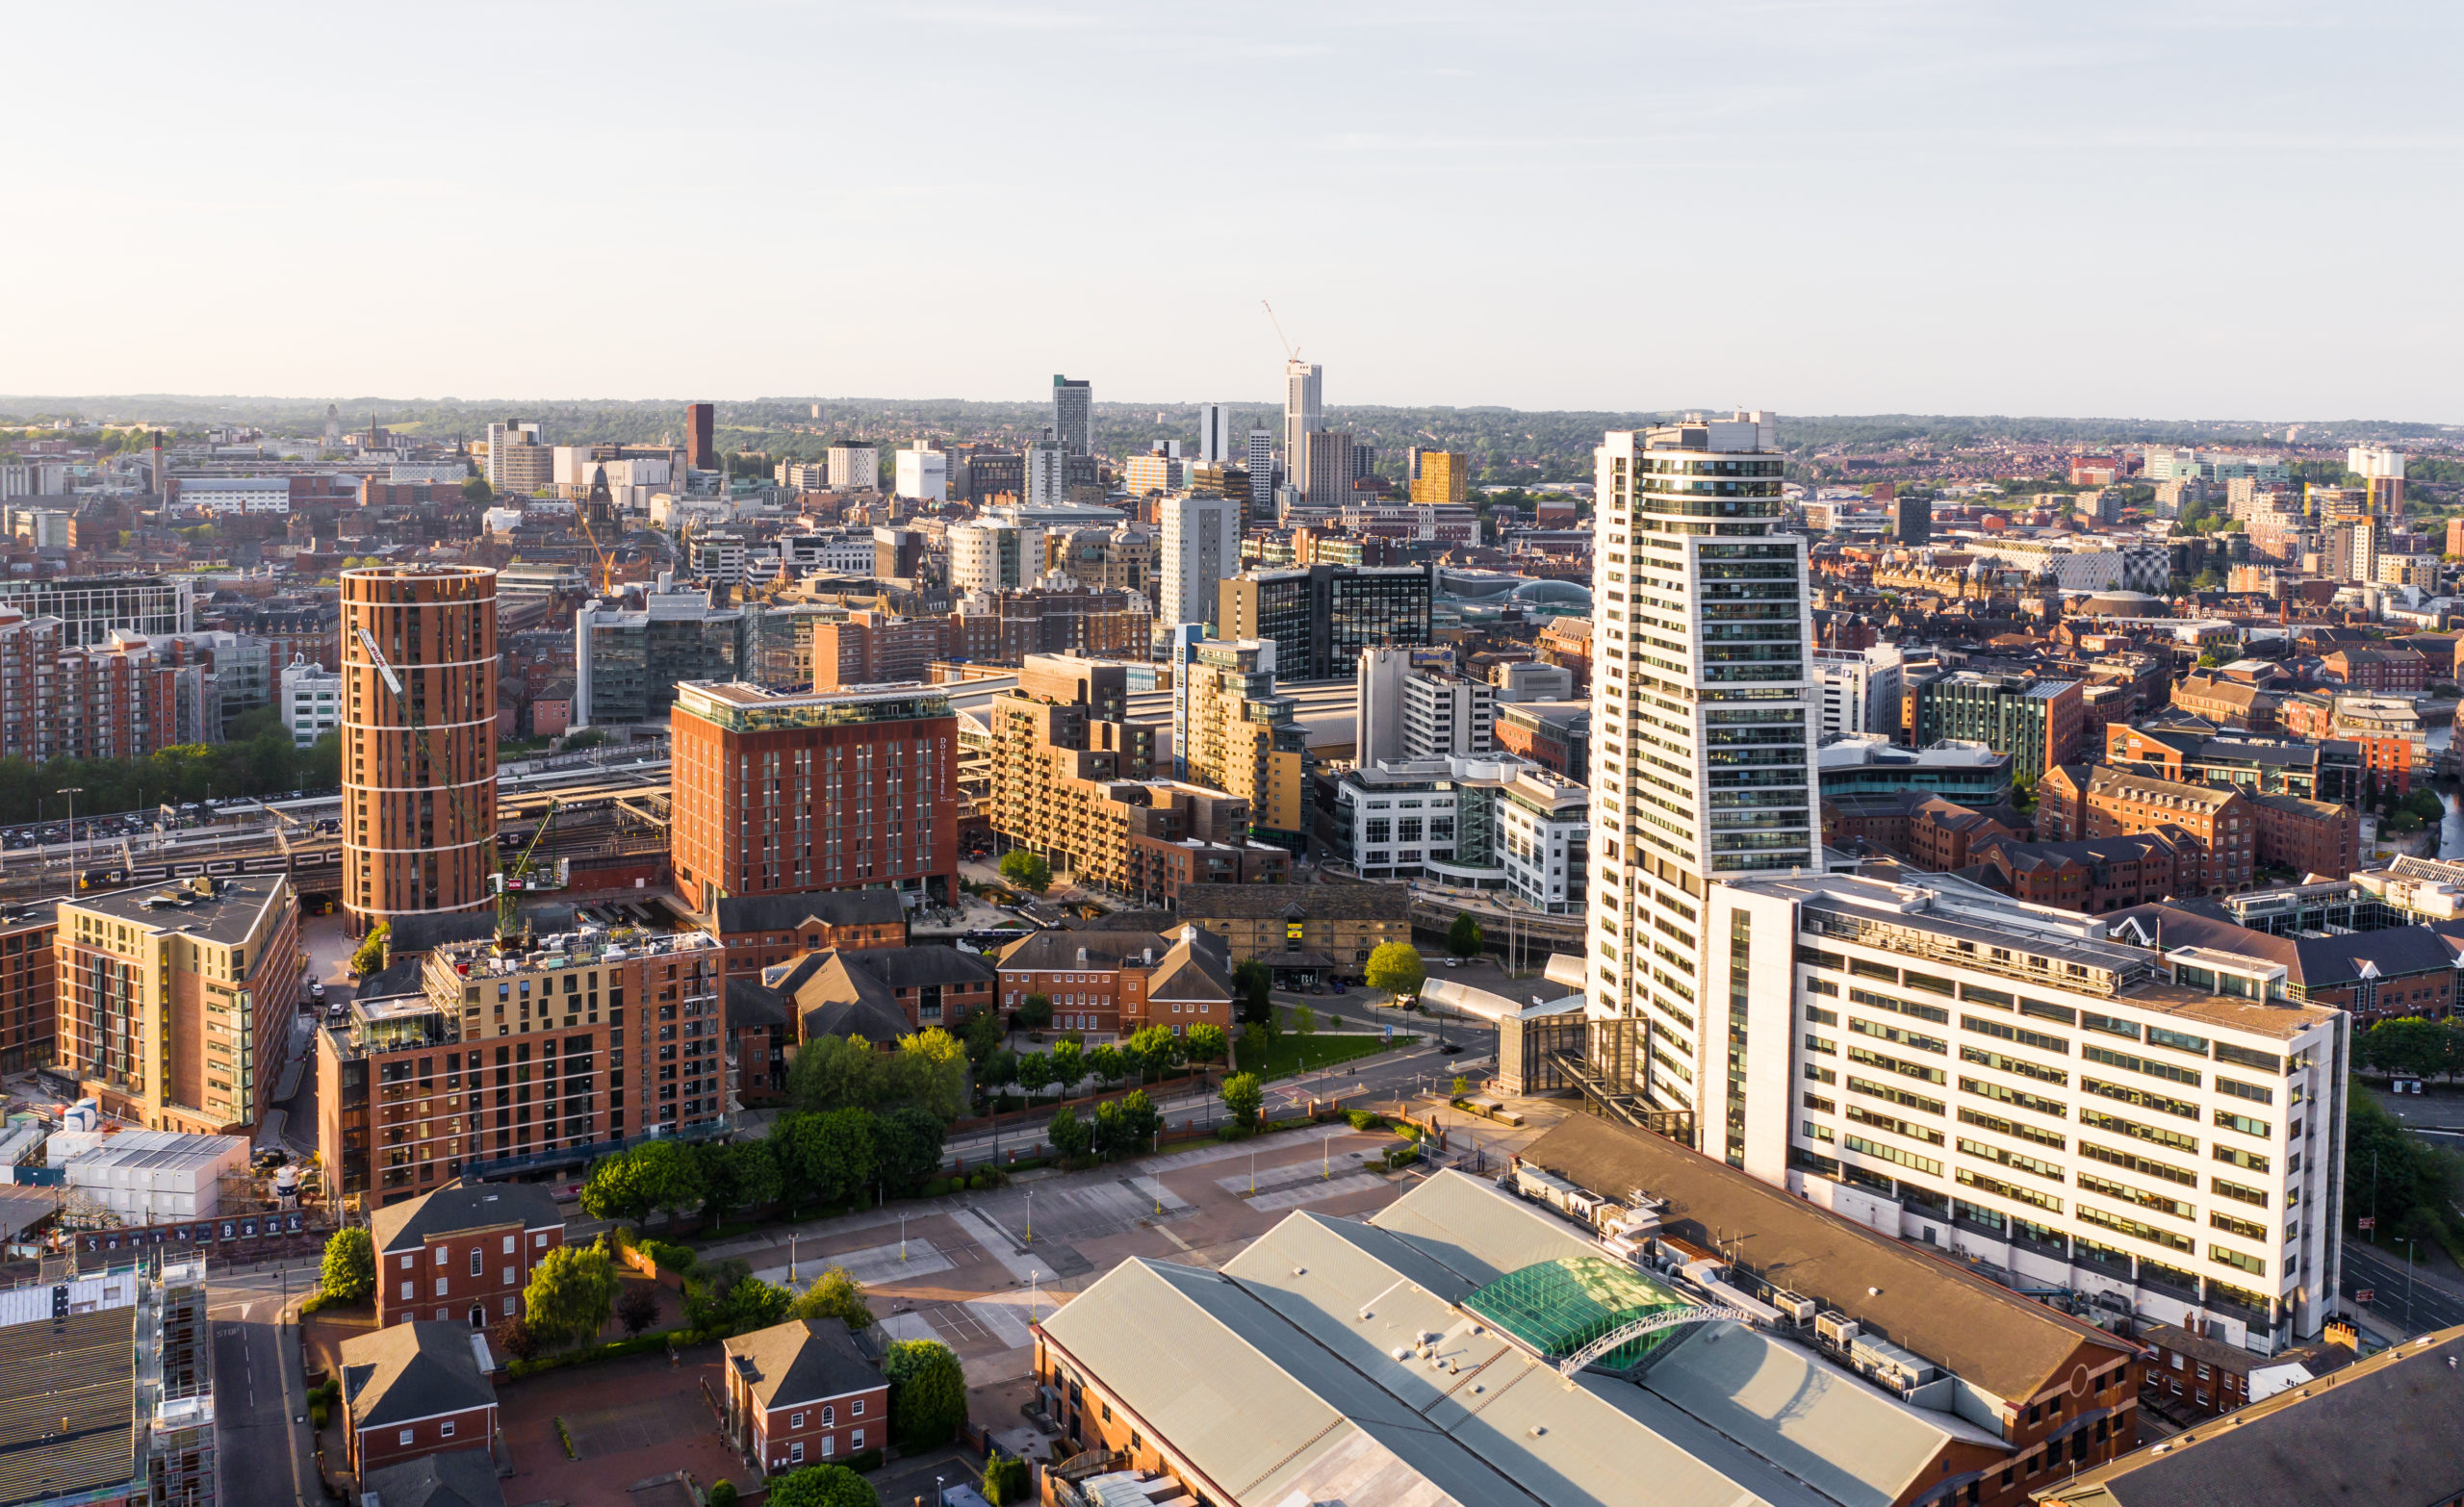 Investment Property Price Growth For Leeds